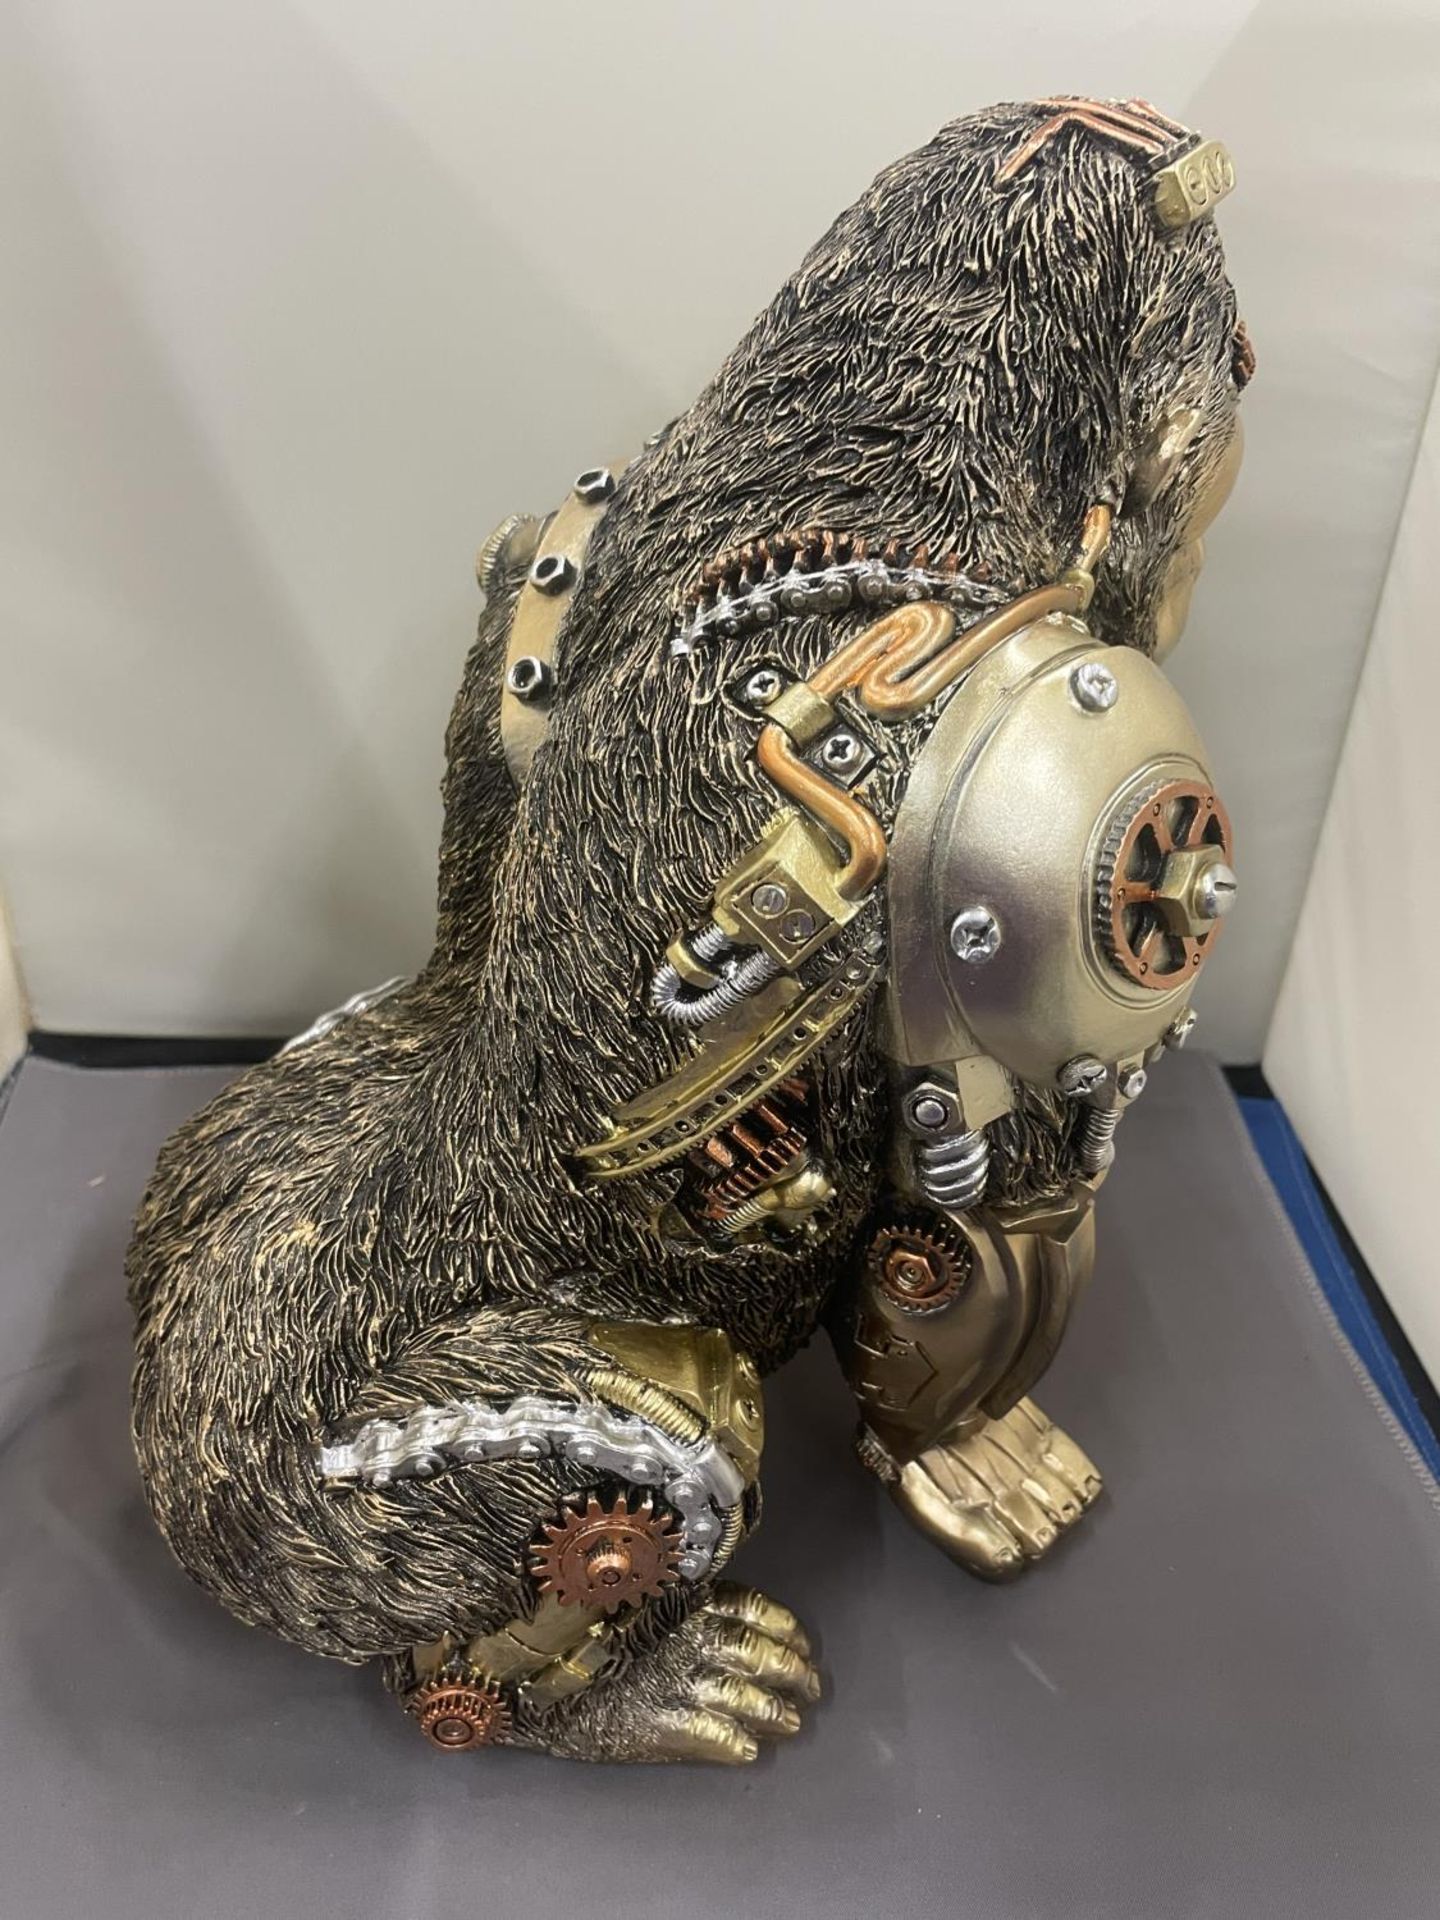 A STEAM PUNK STYLE GORILLA 28CM TALL - Image 6 of 7